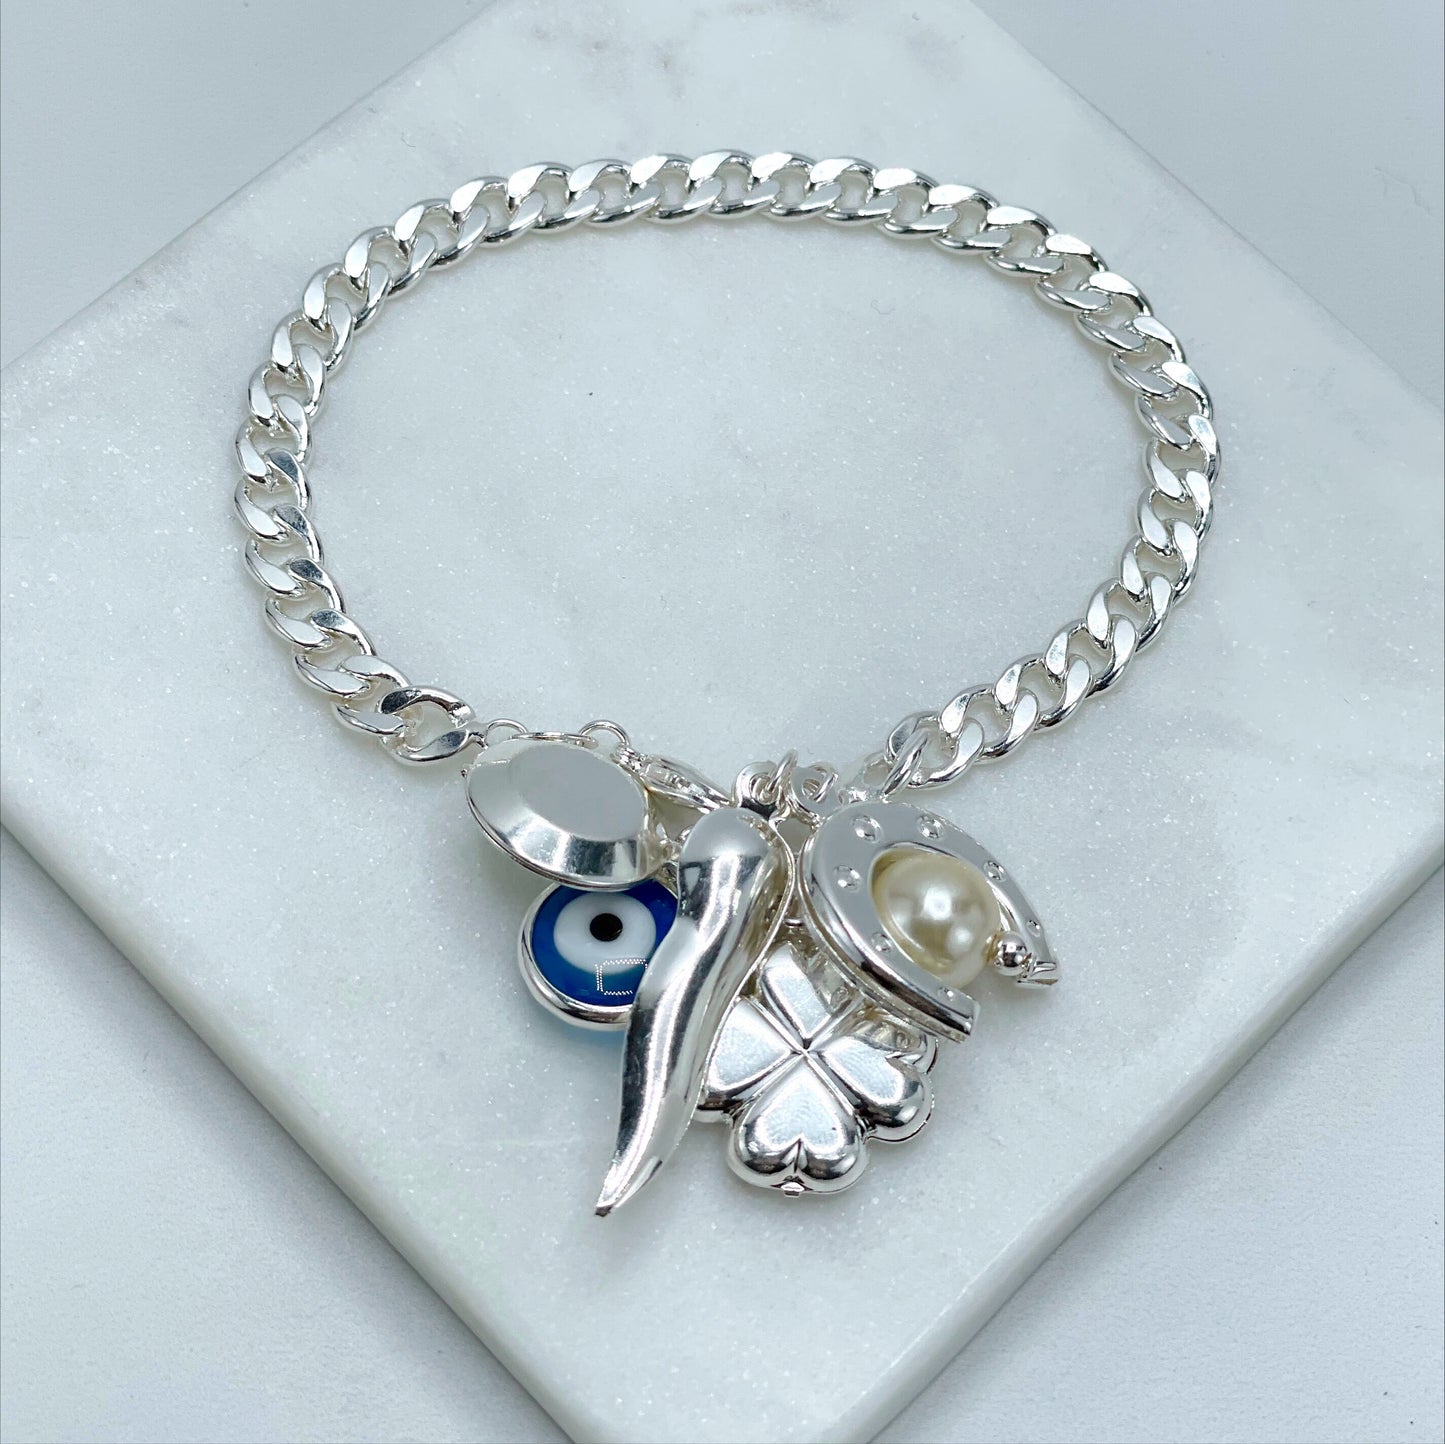 18k Silver Filled Curb Link Chain with Blue Greek Eyes, Horseshoe, Simulated Pearl, Circle and Travel Charms Bracelet, Wholesale Jewelry